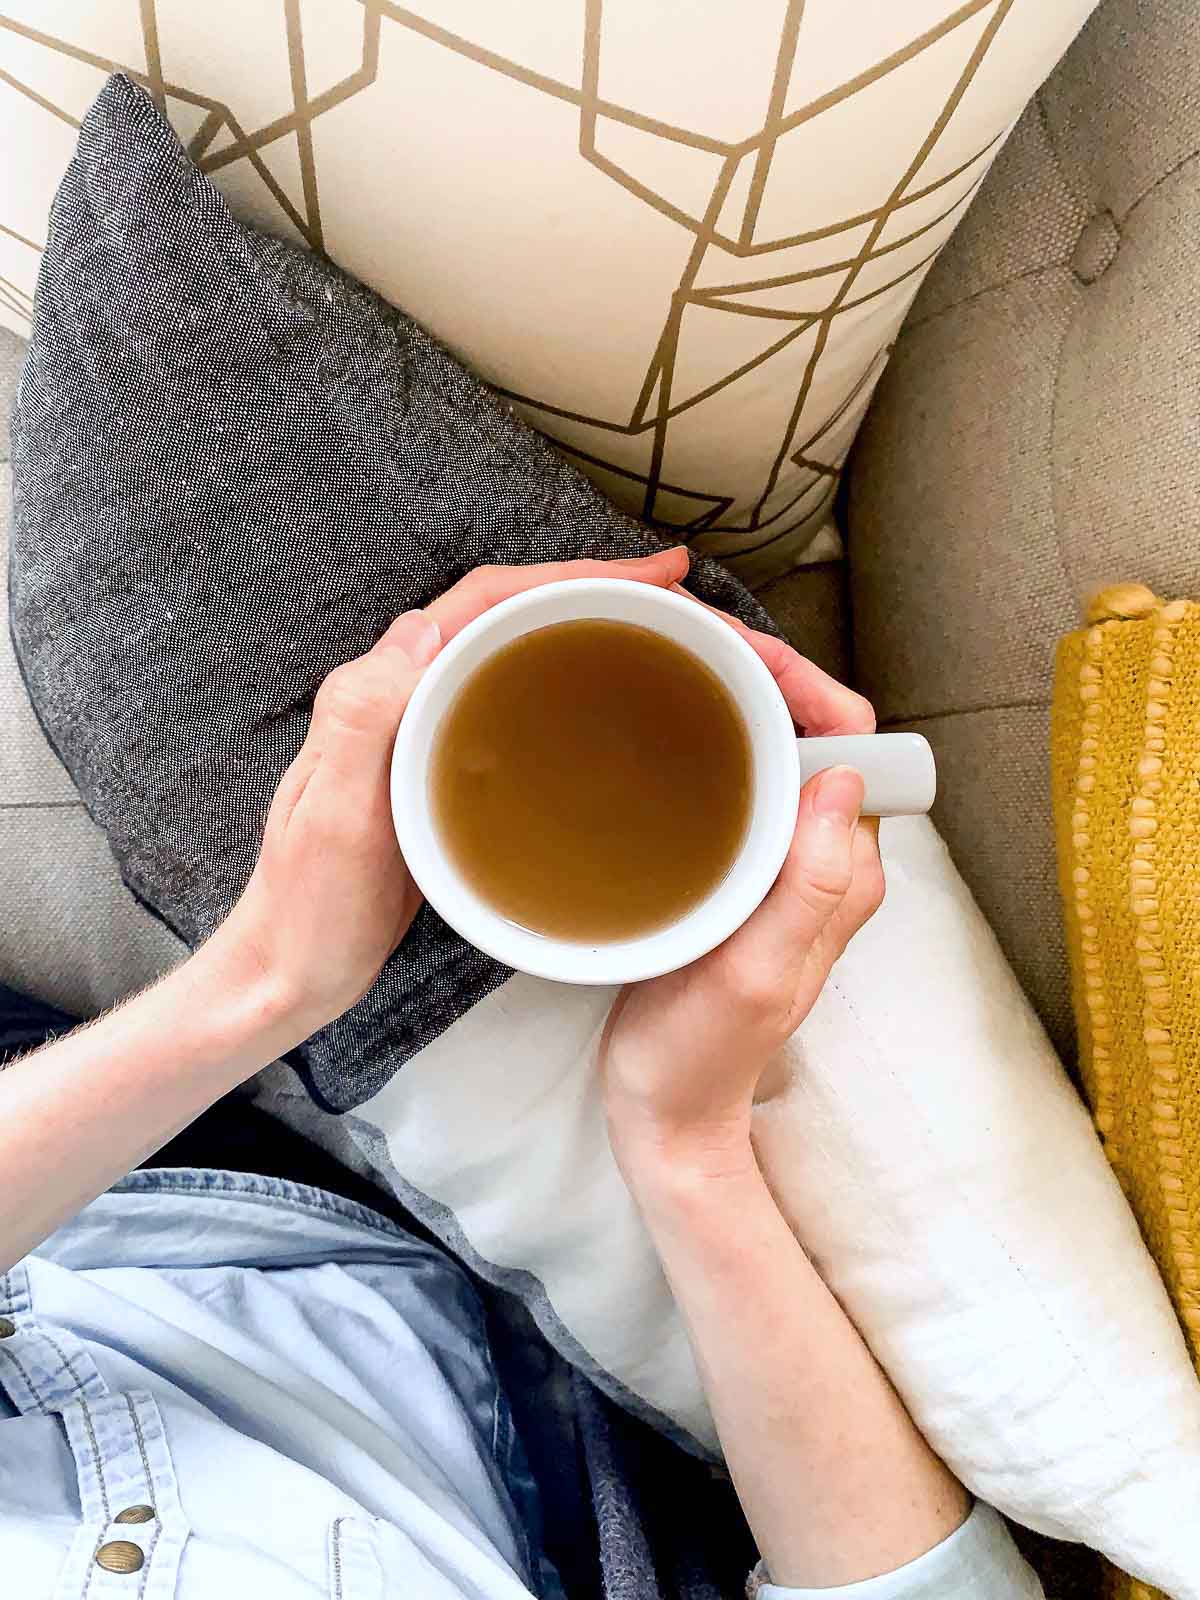 Overhead shot of a woman's hands holding a mug of tea on a sofa, surrounded by cushions.